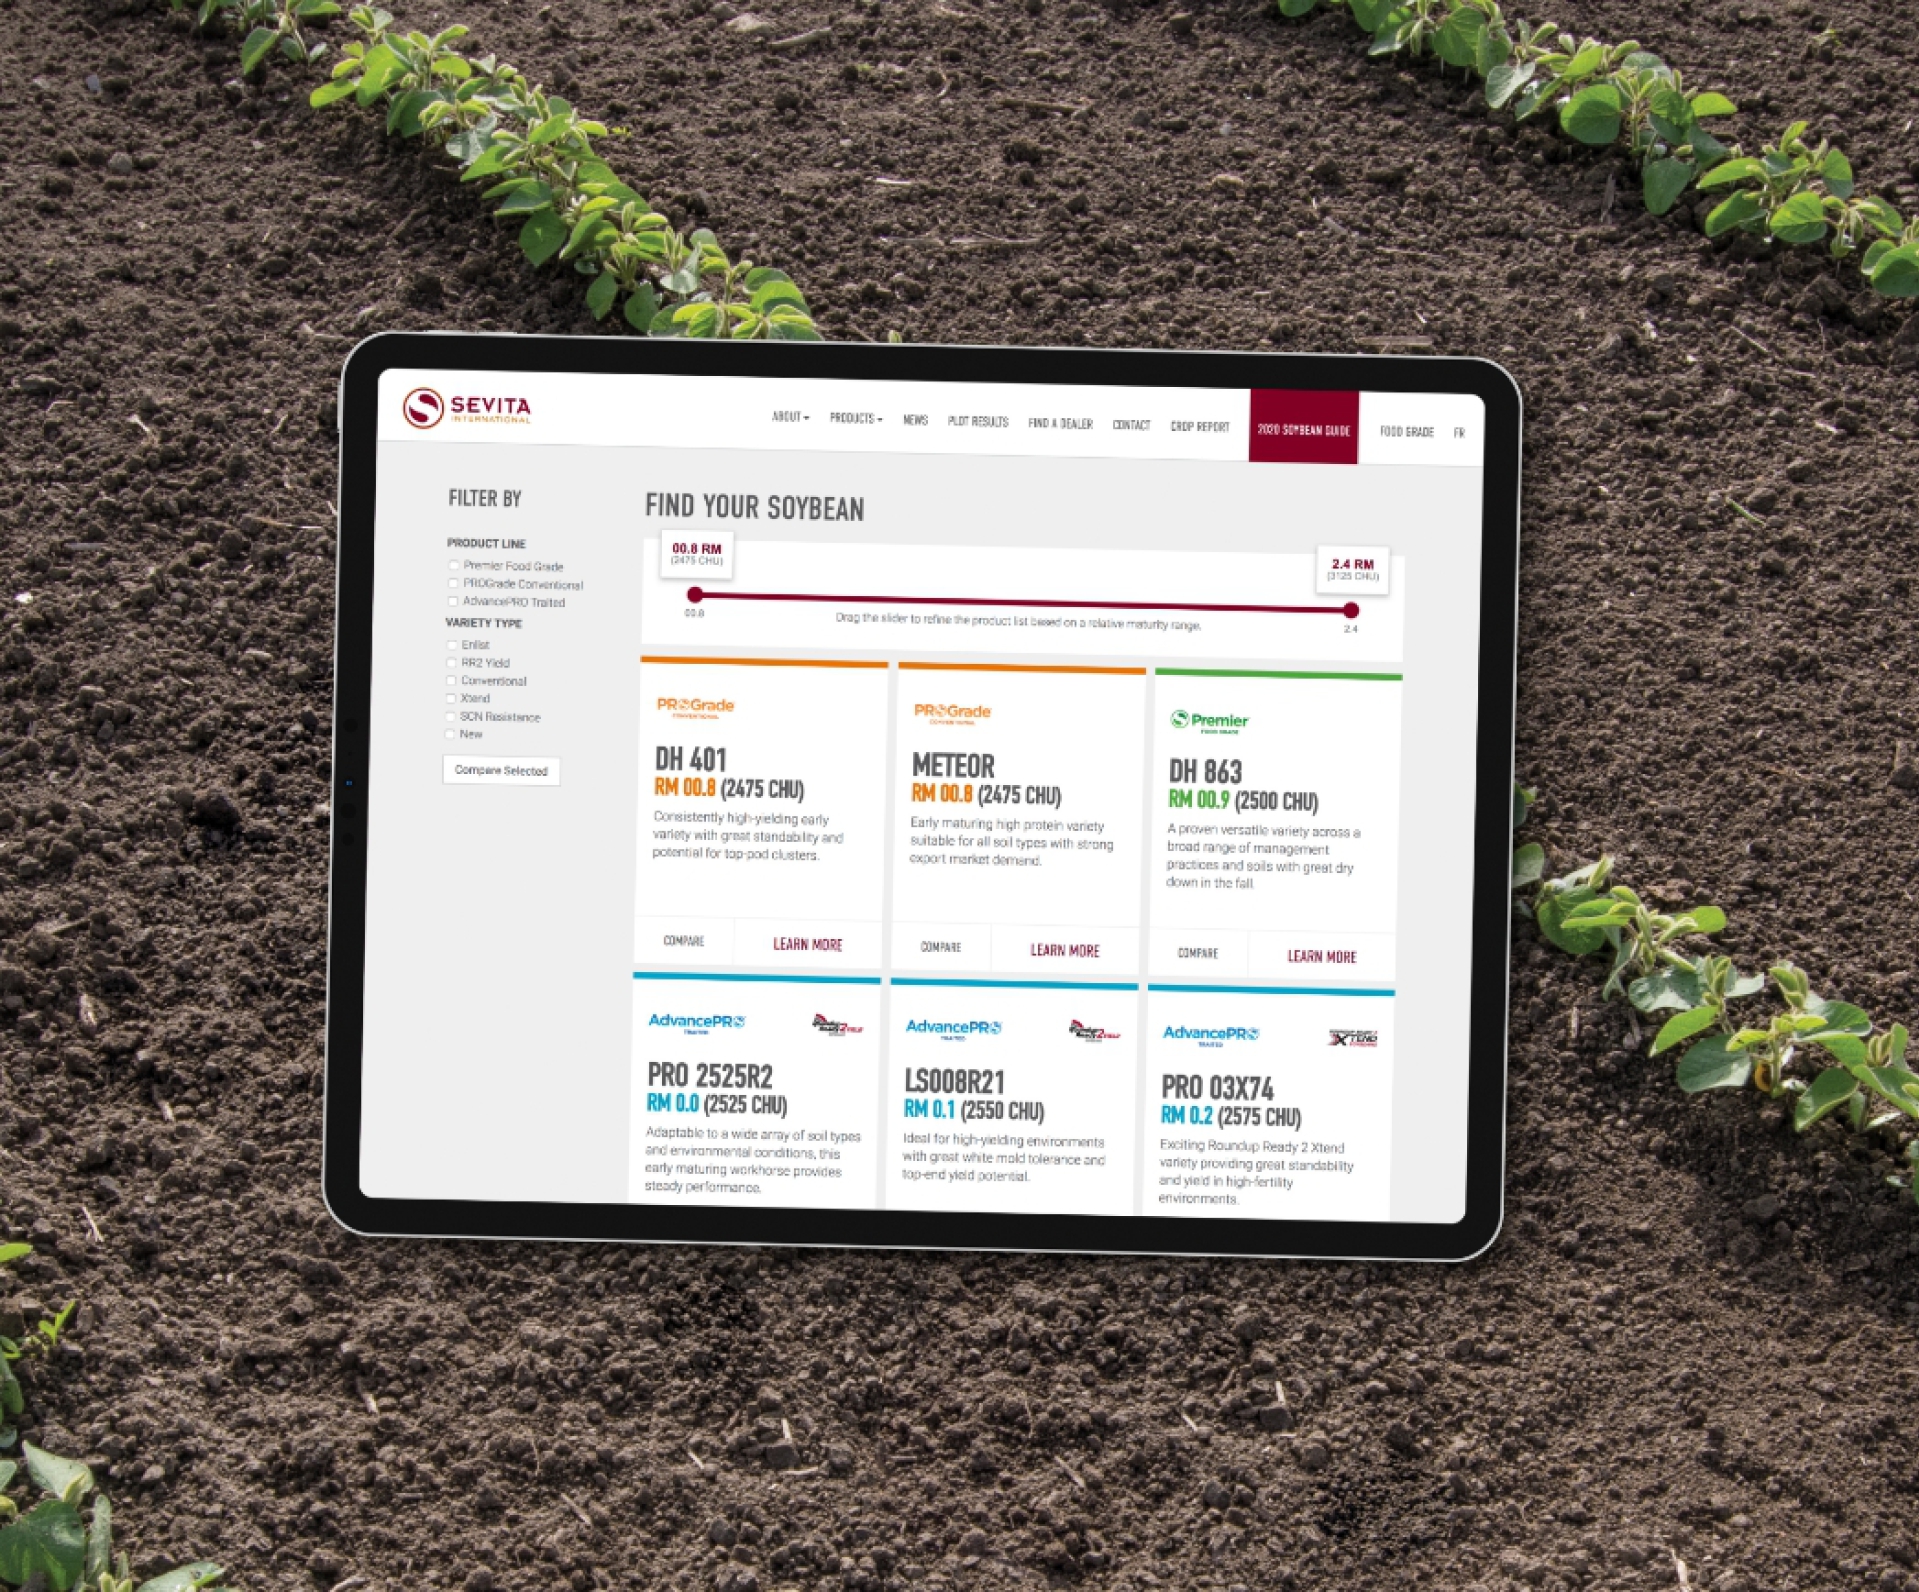 The Sevita website on a tablet screen with a farming field in the background